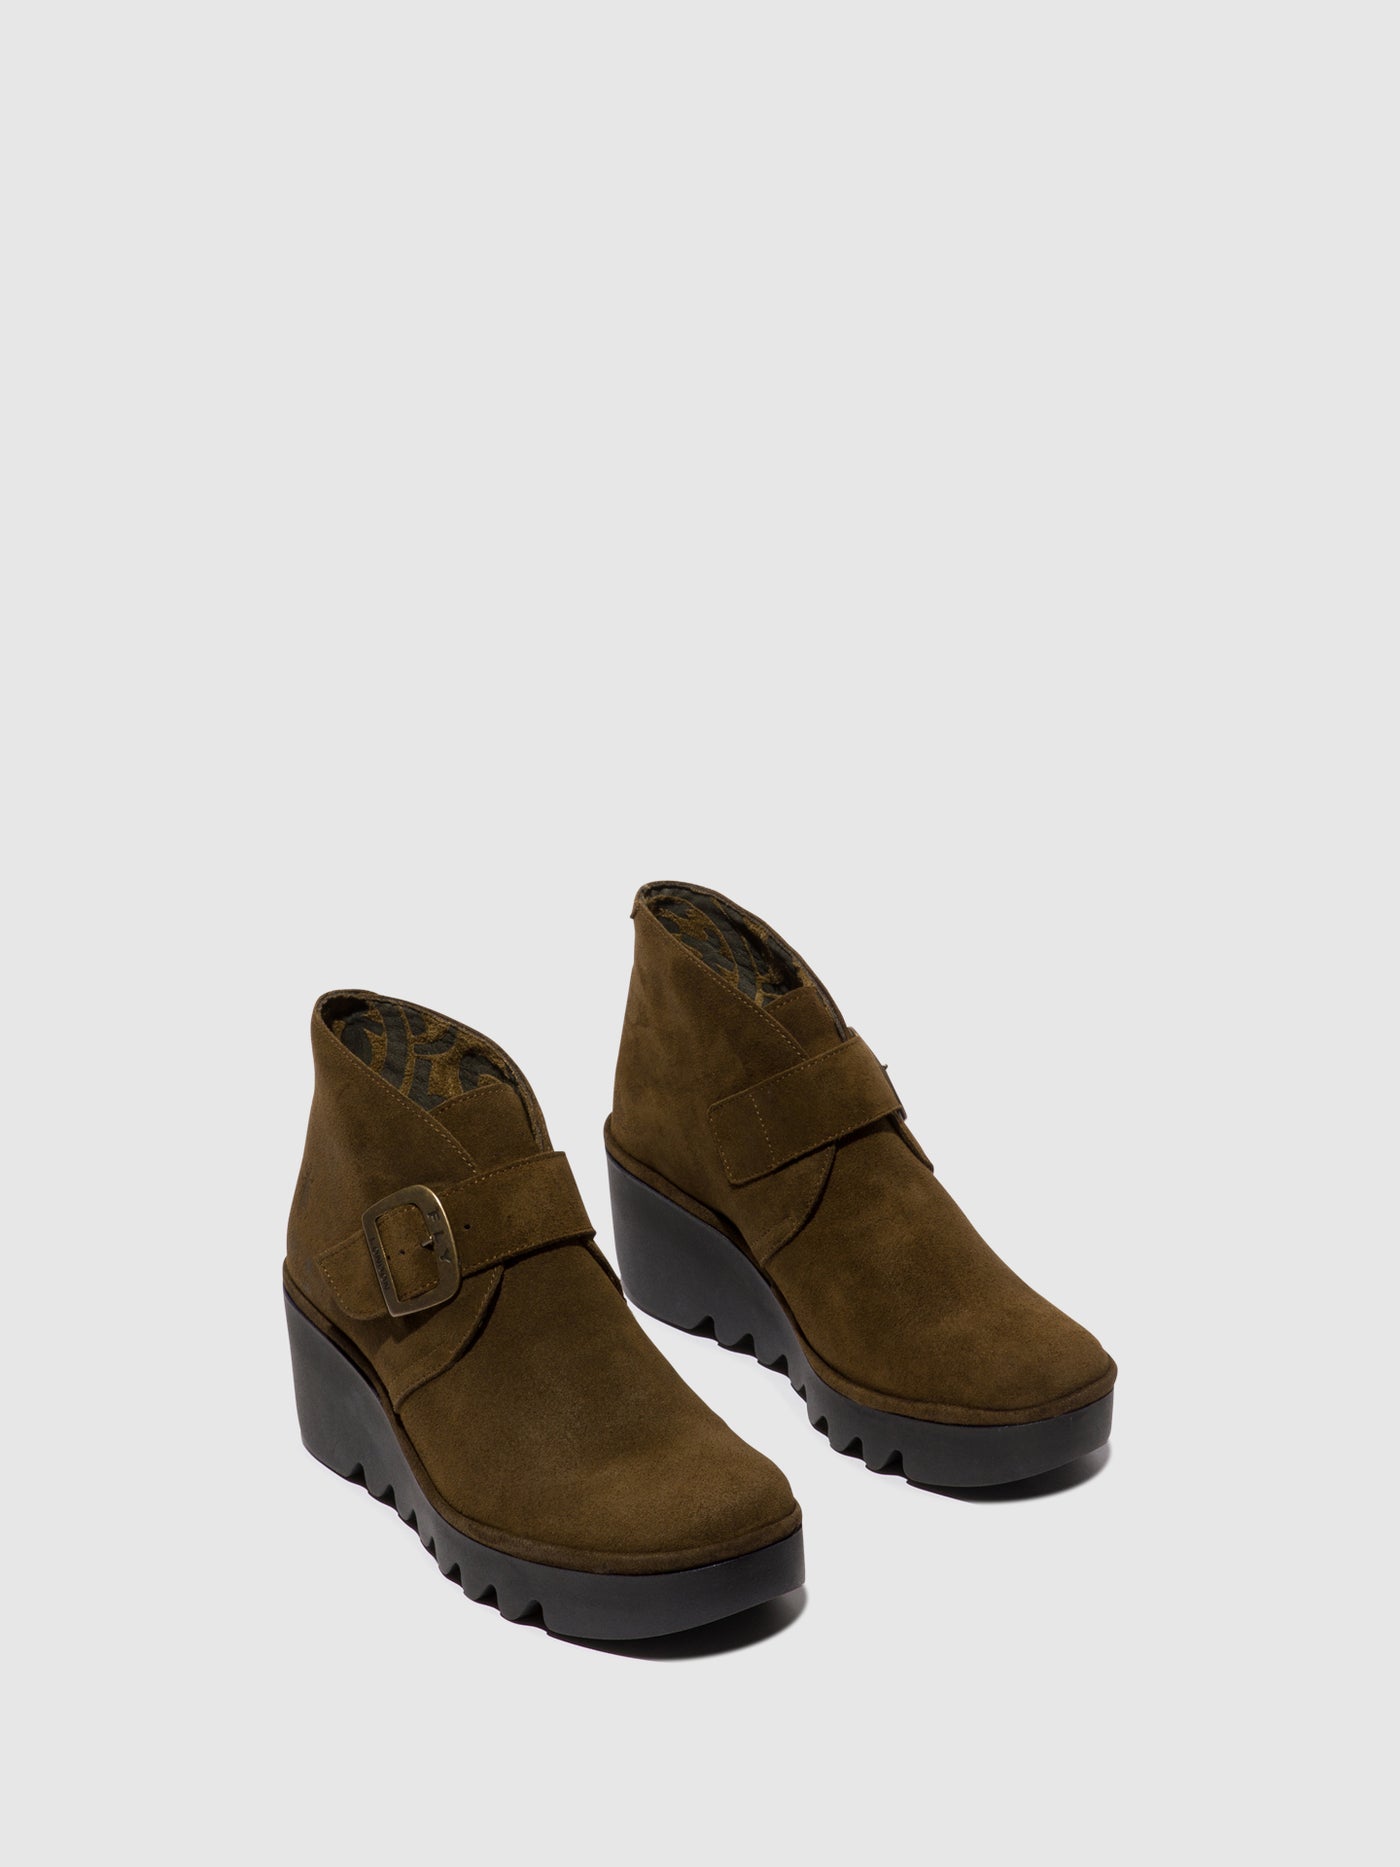 Buckle Ankle Boots BIRT397FLY SLUDGE